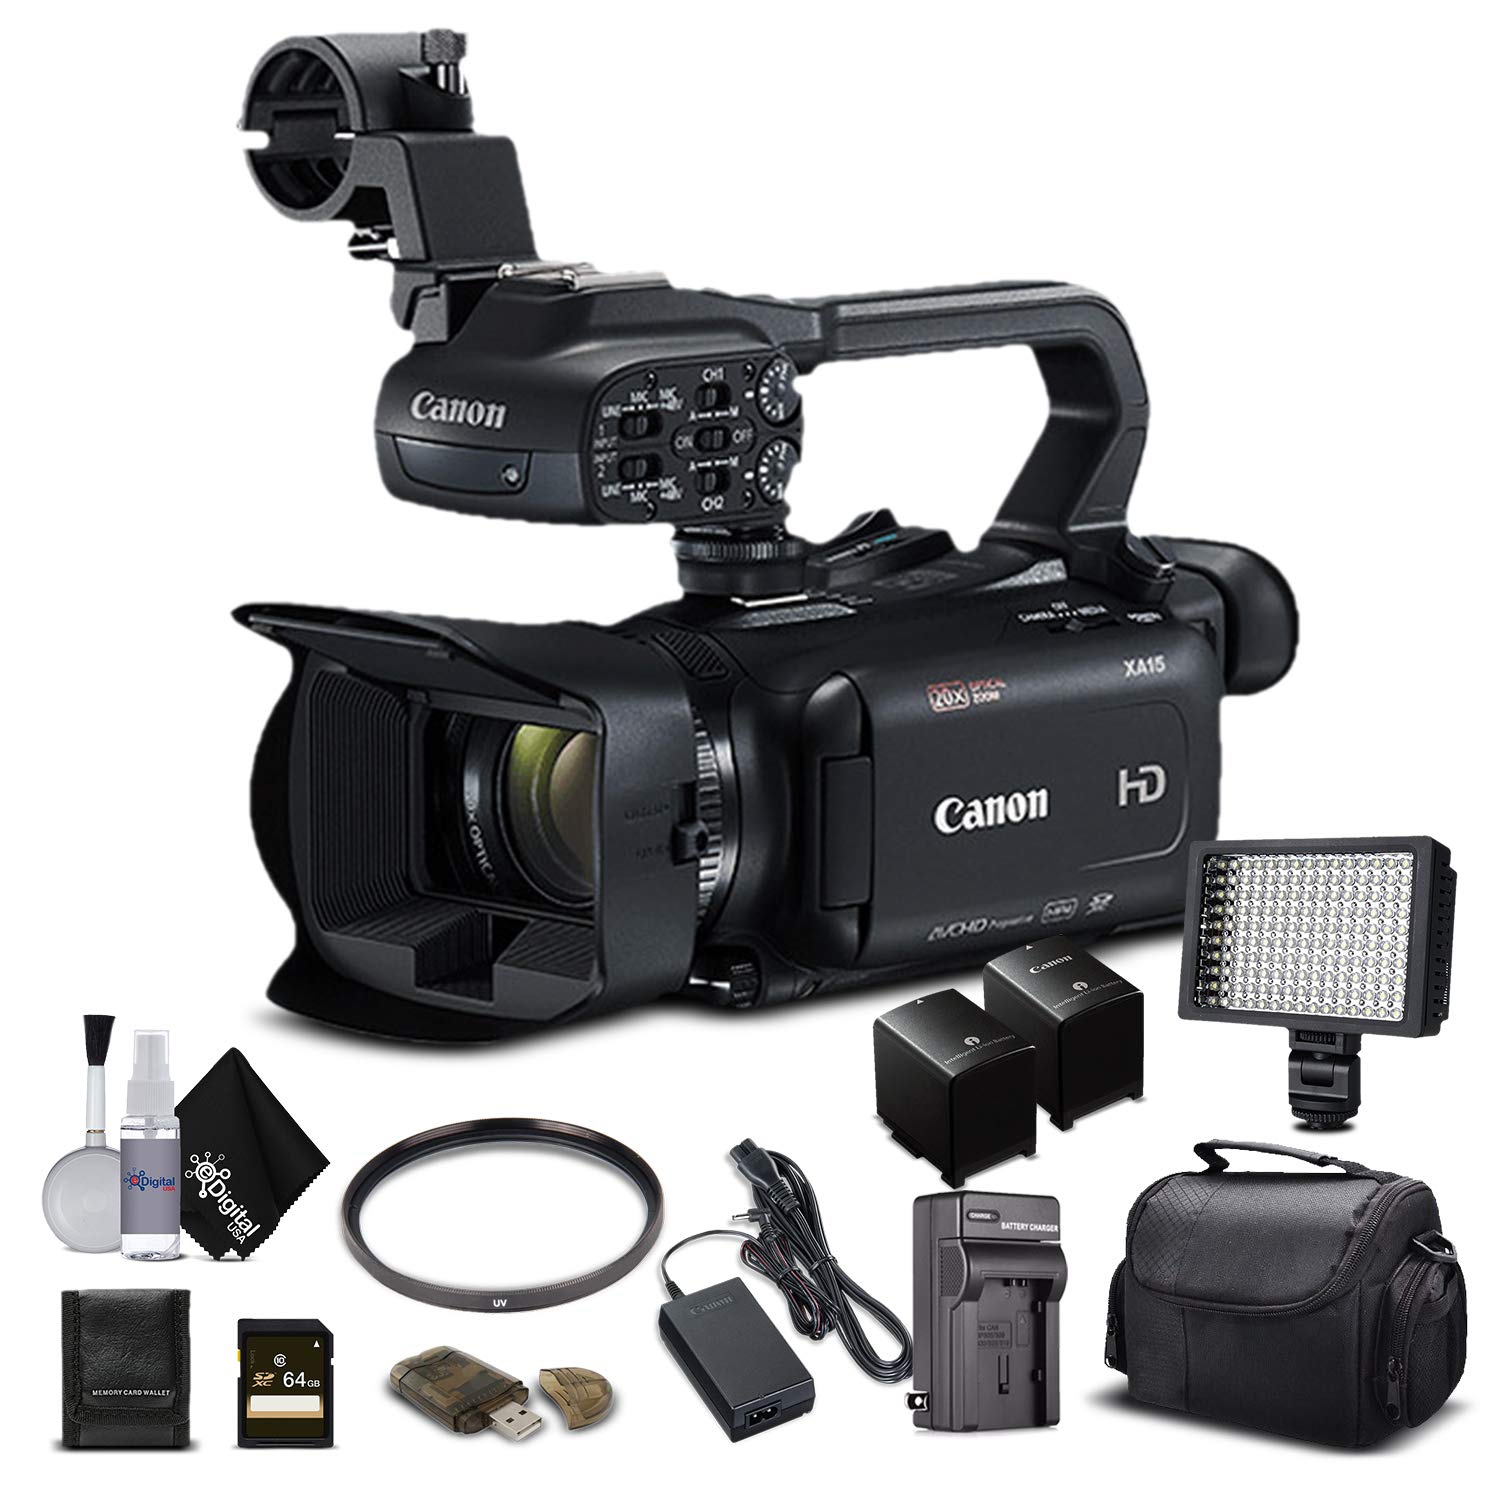 Canon XA11 Compact Full HD Camcorder 2218C002 with 64GB Memory Card, Extra Battery and Charger, UV Filter, LED Light, Ca